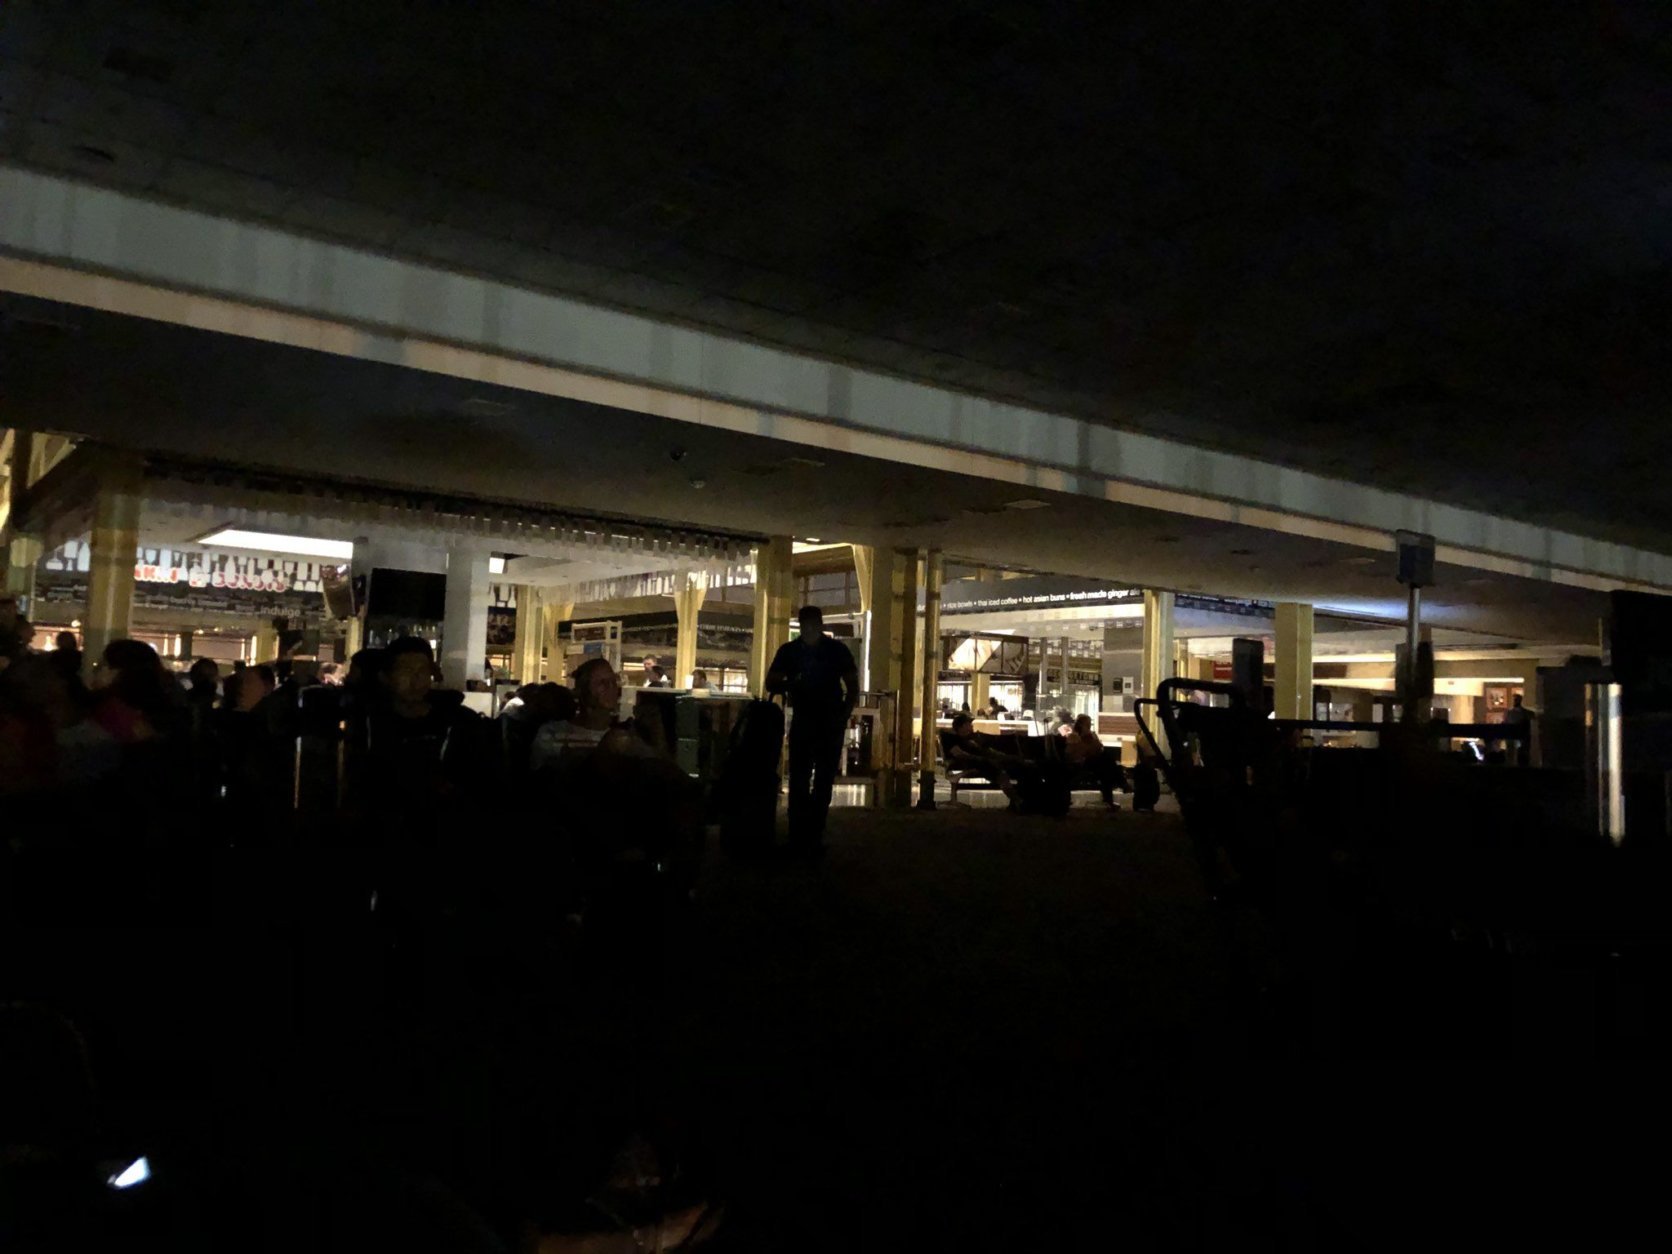 Reagan National Airport tweeted about an airport-wide power outage shortly before 10 p.m. Wednesday, Aug. 15, 2018. (Courtesy Brigid Evans via Twitter <a href="https://twitter.com/be_brig/status/1029910965331132416">@be_brig</a>)